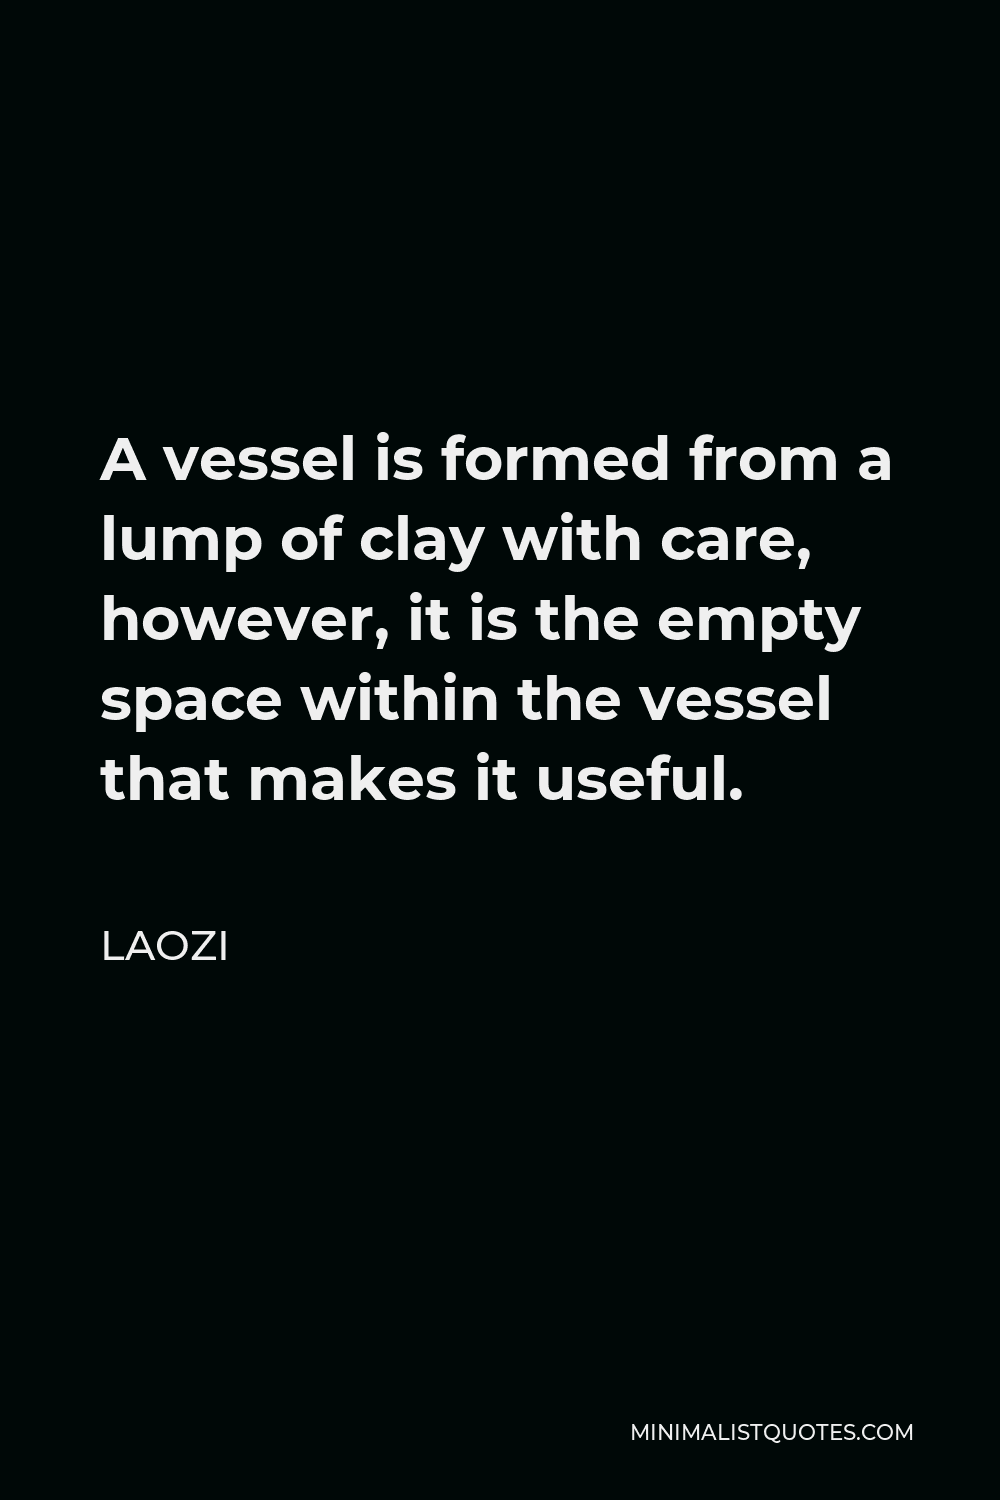 Laozi Quote - A vessel is formed from a lump of clay with care, however, it is the empty space within the vessel that makes it useful.